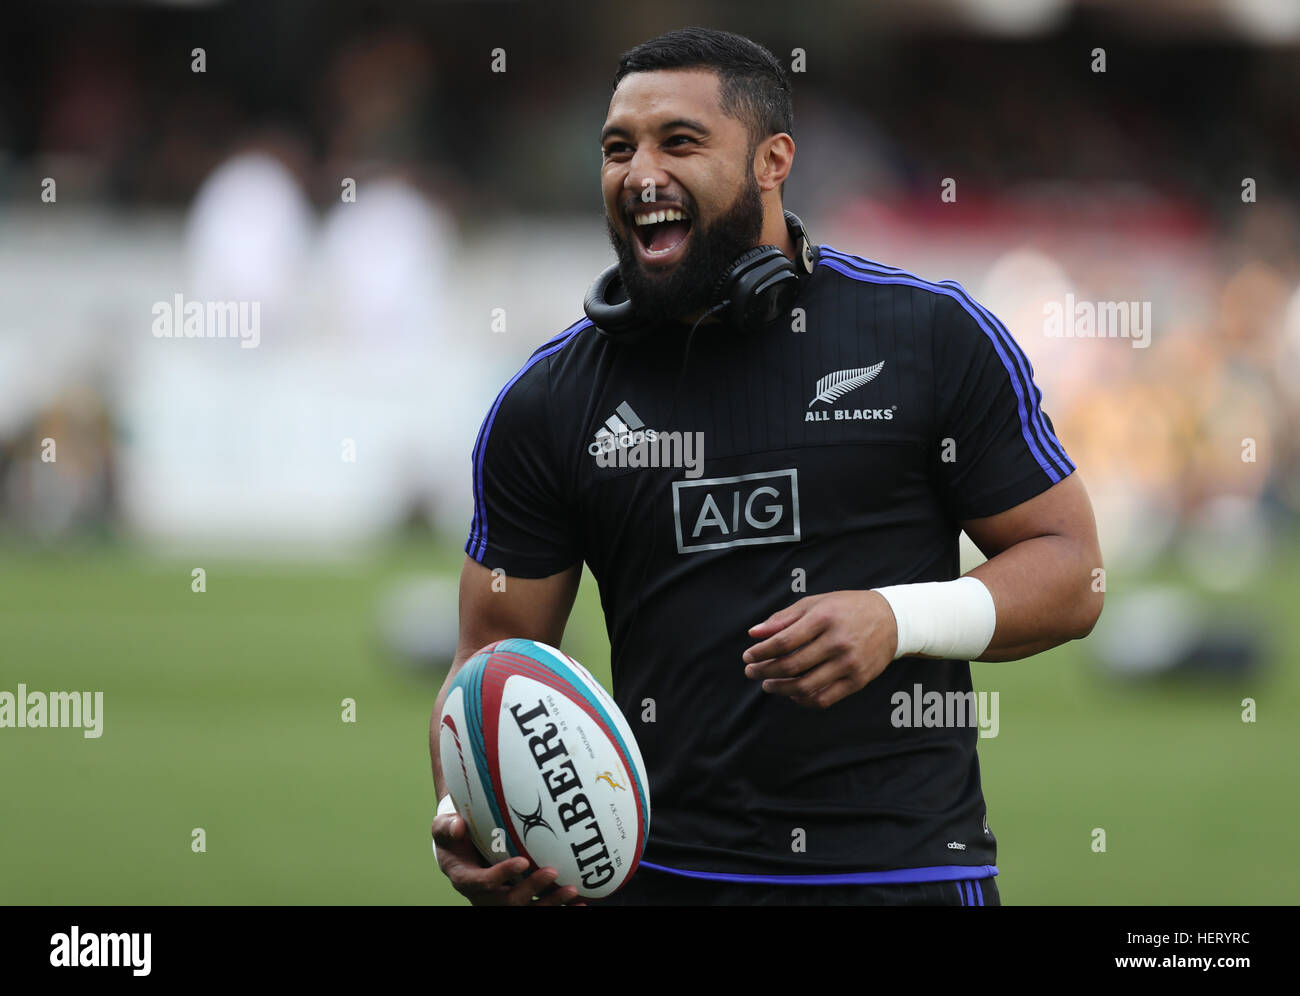 DURBAN, SOUTH AFRICA - OCTOBER 08: Lima Sopoaga of New Zealand during the The Rugby Championship match between South Africa and New Zealand at Growthp Stock Photo